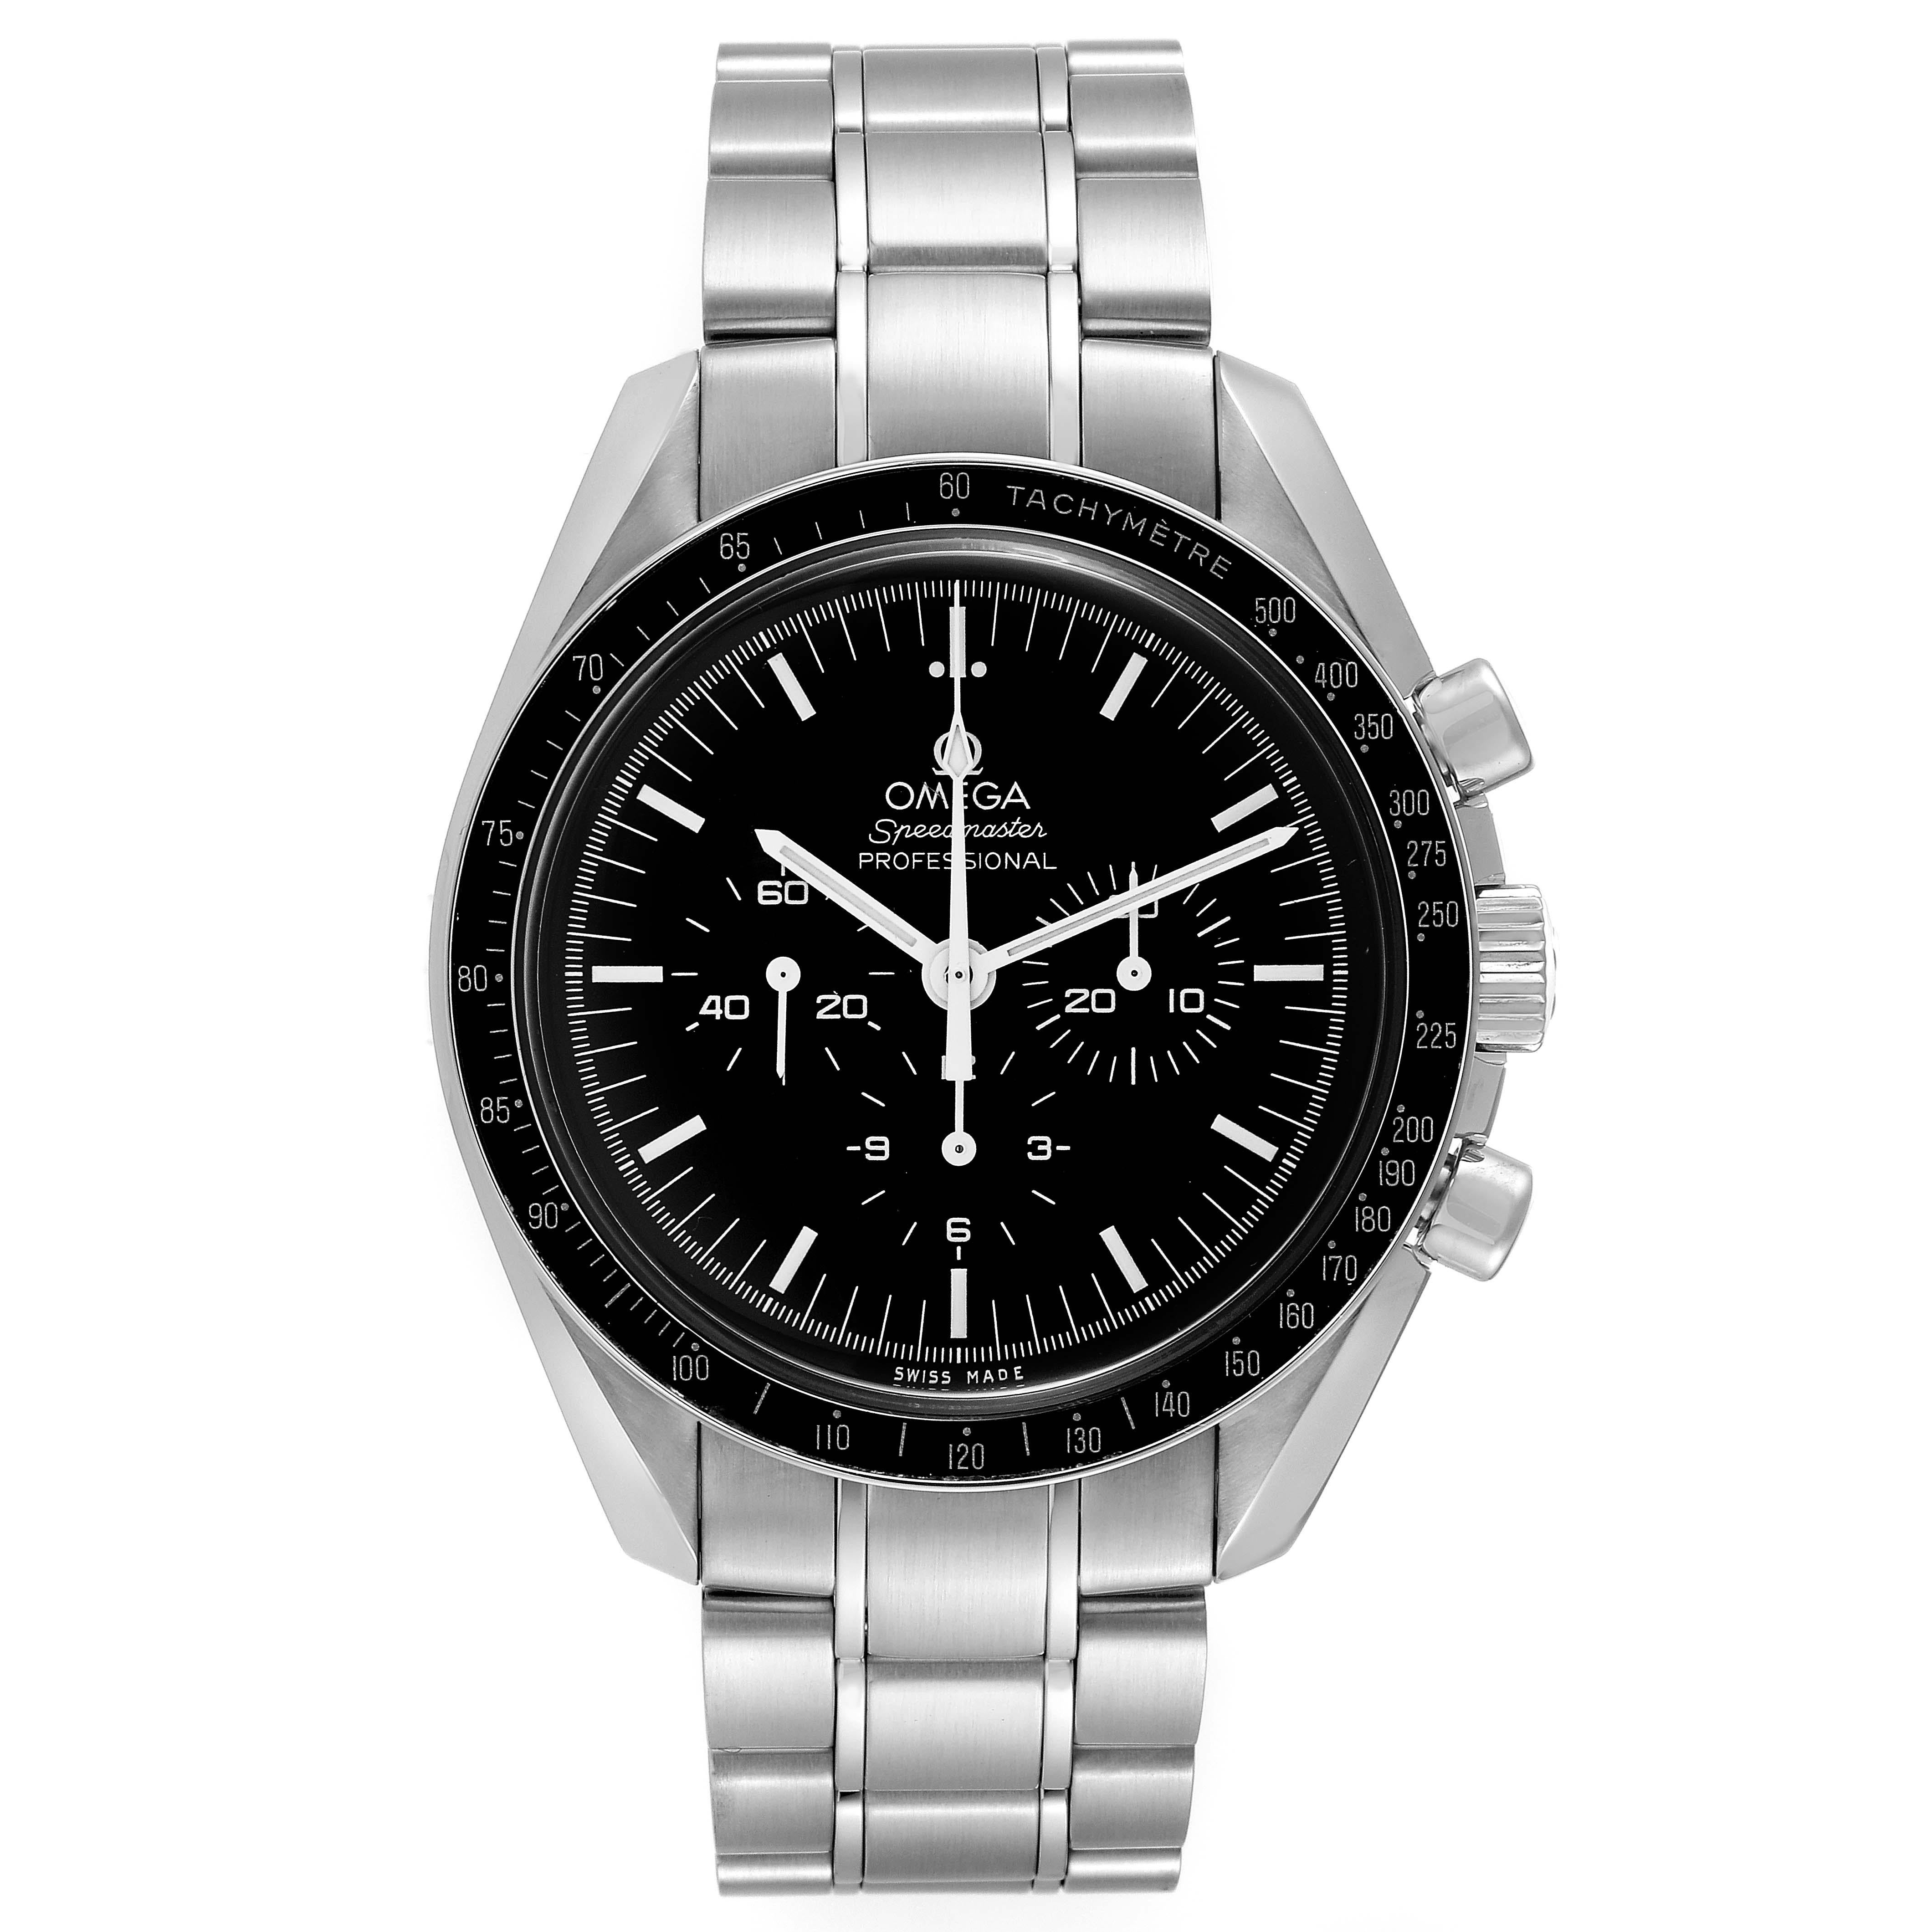 Omega Speedmaster Moonwatch Steel Mens Watch 311.30.42.30.01.005 Box Card. Manual winding chronograph movement. Stainless steel round case 42.0 mm in diameter. Stainless steel bezel with tachymeter function. Hesalite acrylic crystal. Black dial with